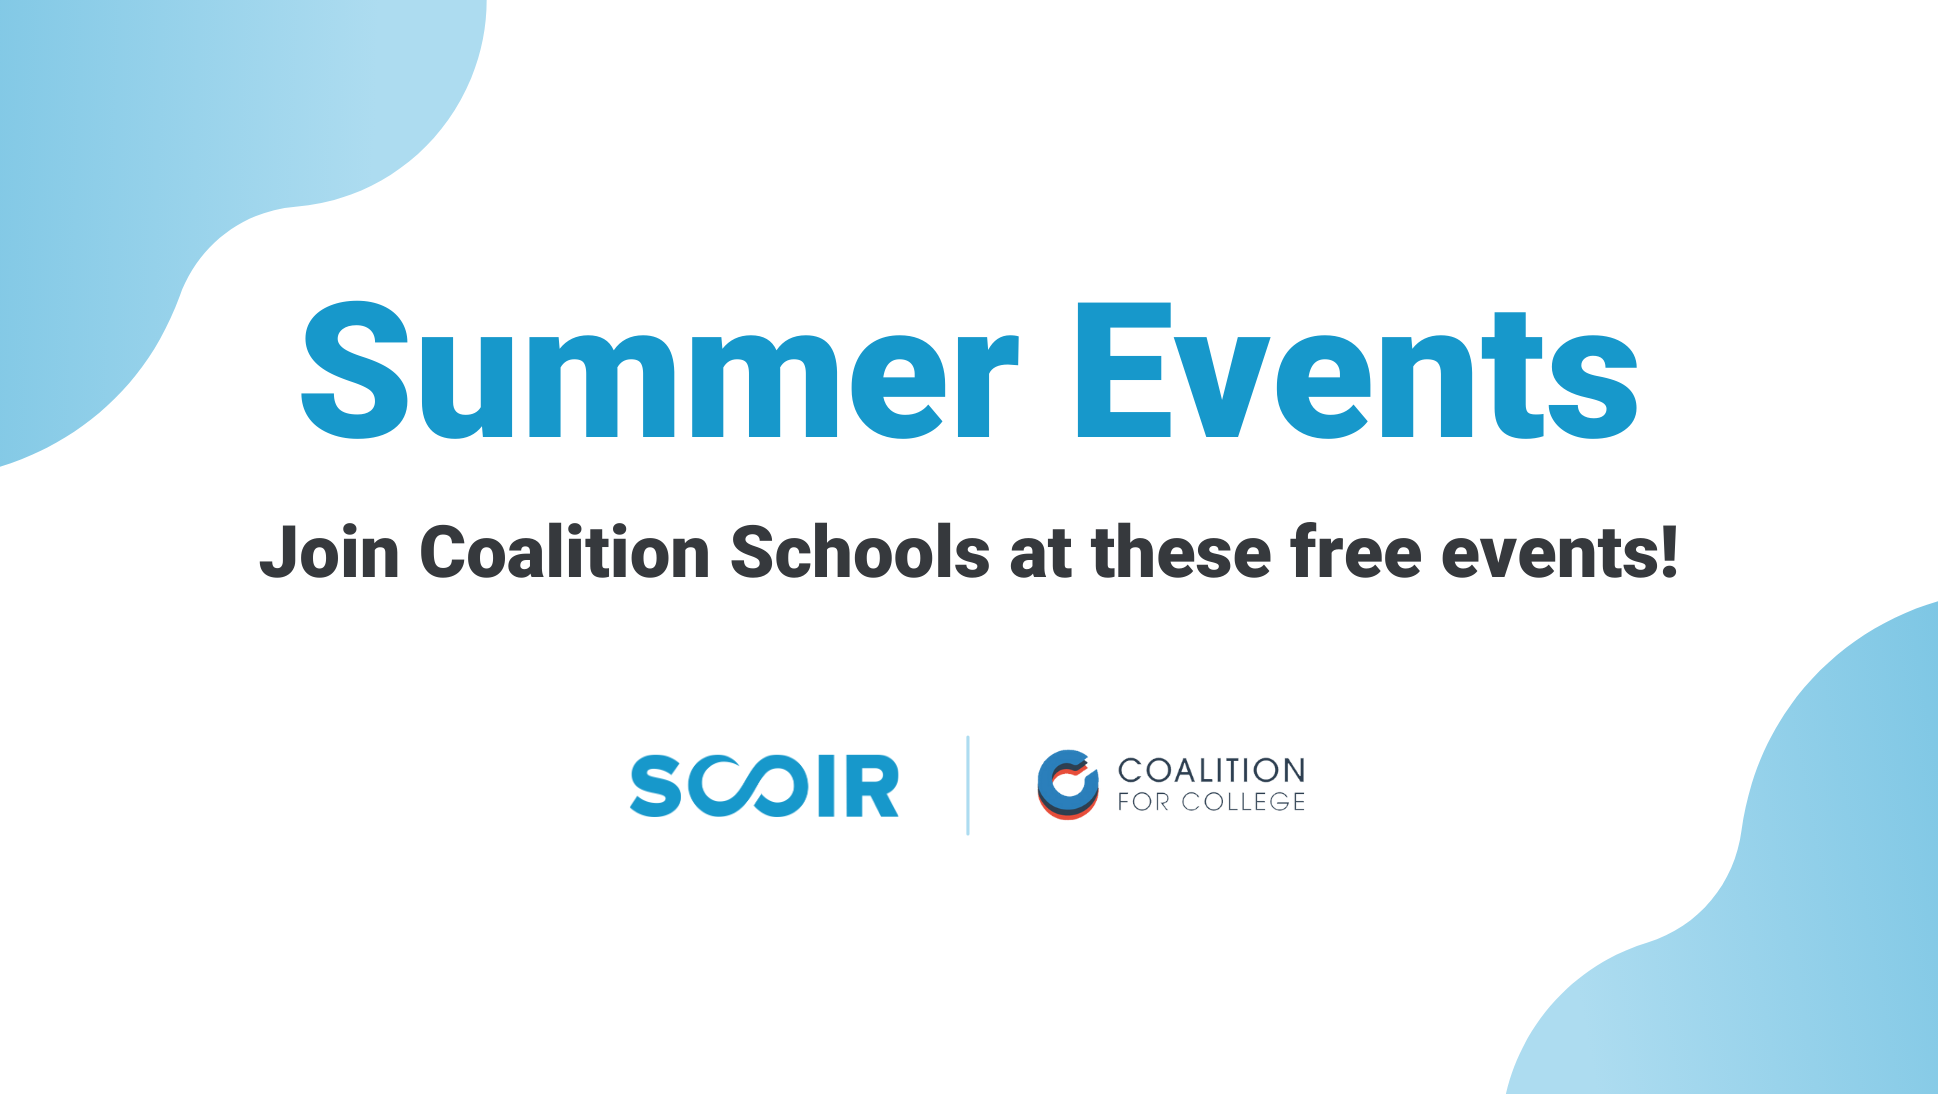 Explore Coalition's Summer Events for Students